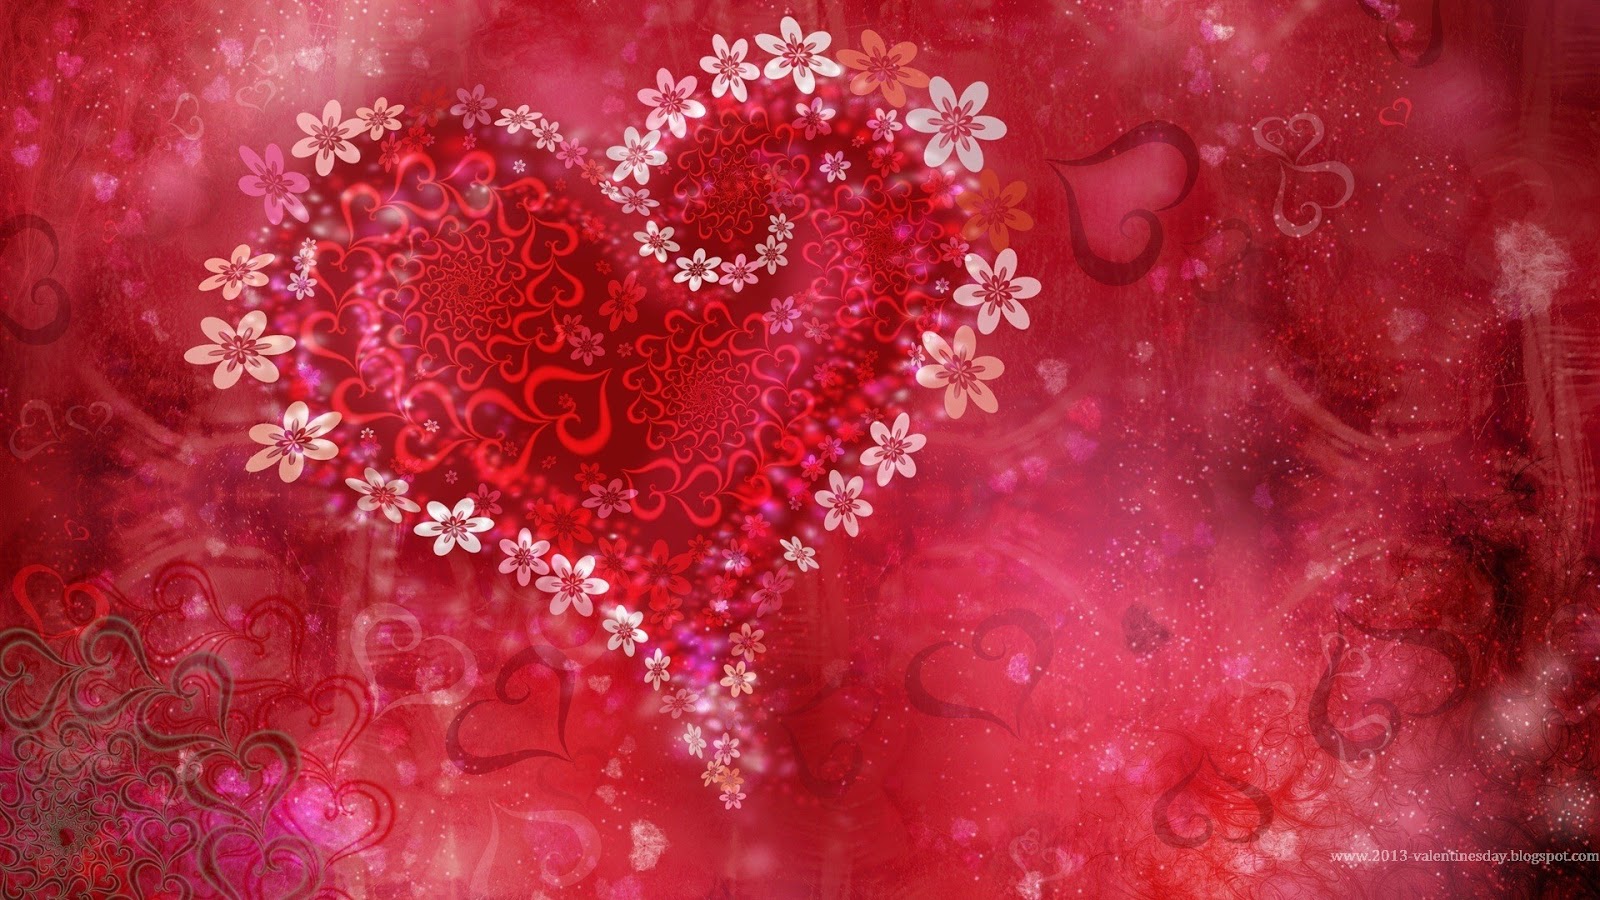 Valentines day hearts HD wallpapers 1024px and 1920px